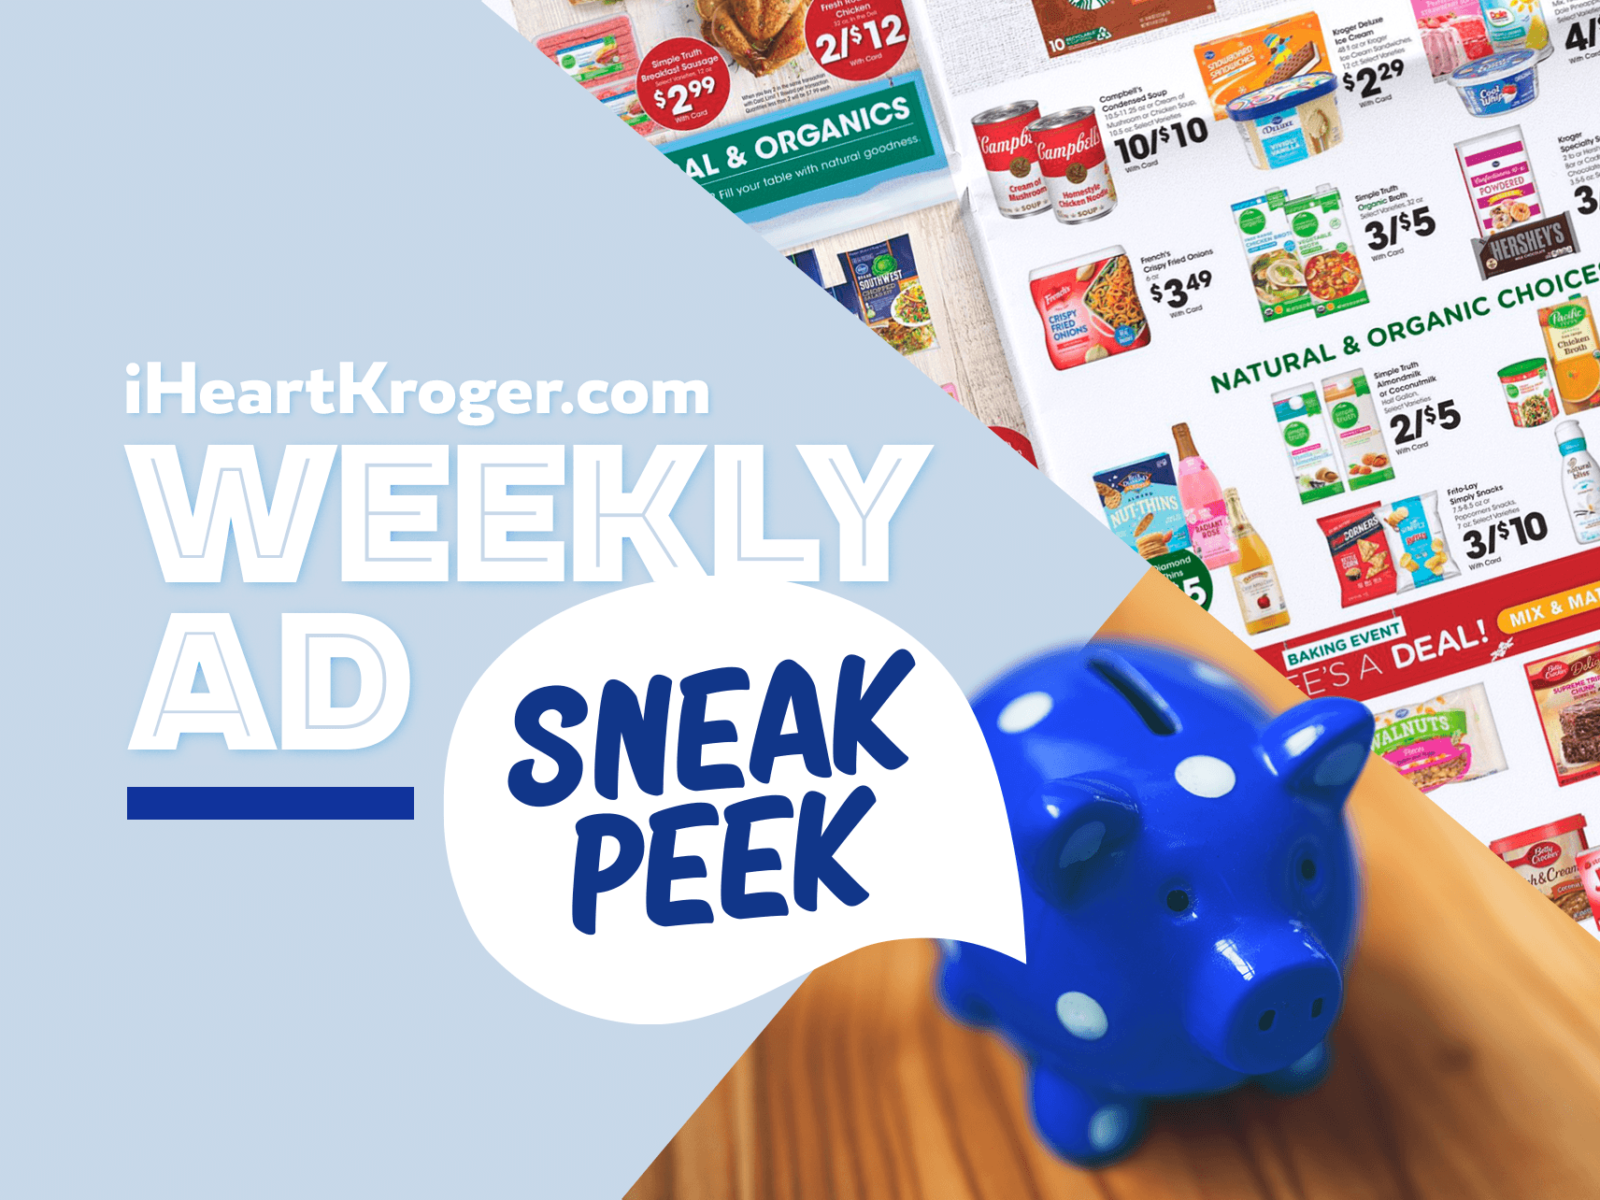 Kroger Ad & Coupons Week Of 2/1 to 2/7 – Mega Sale Continues!